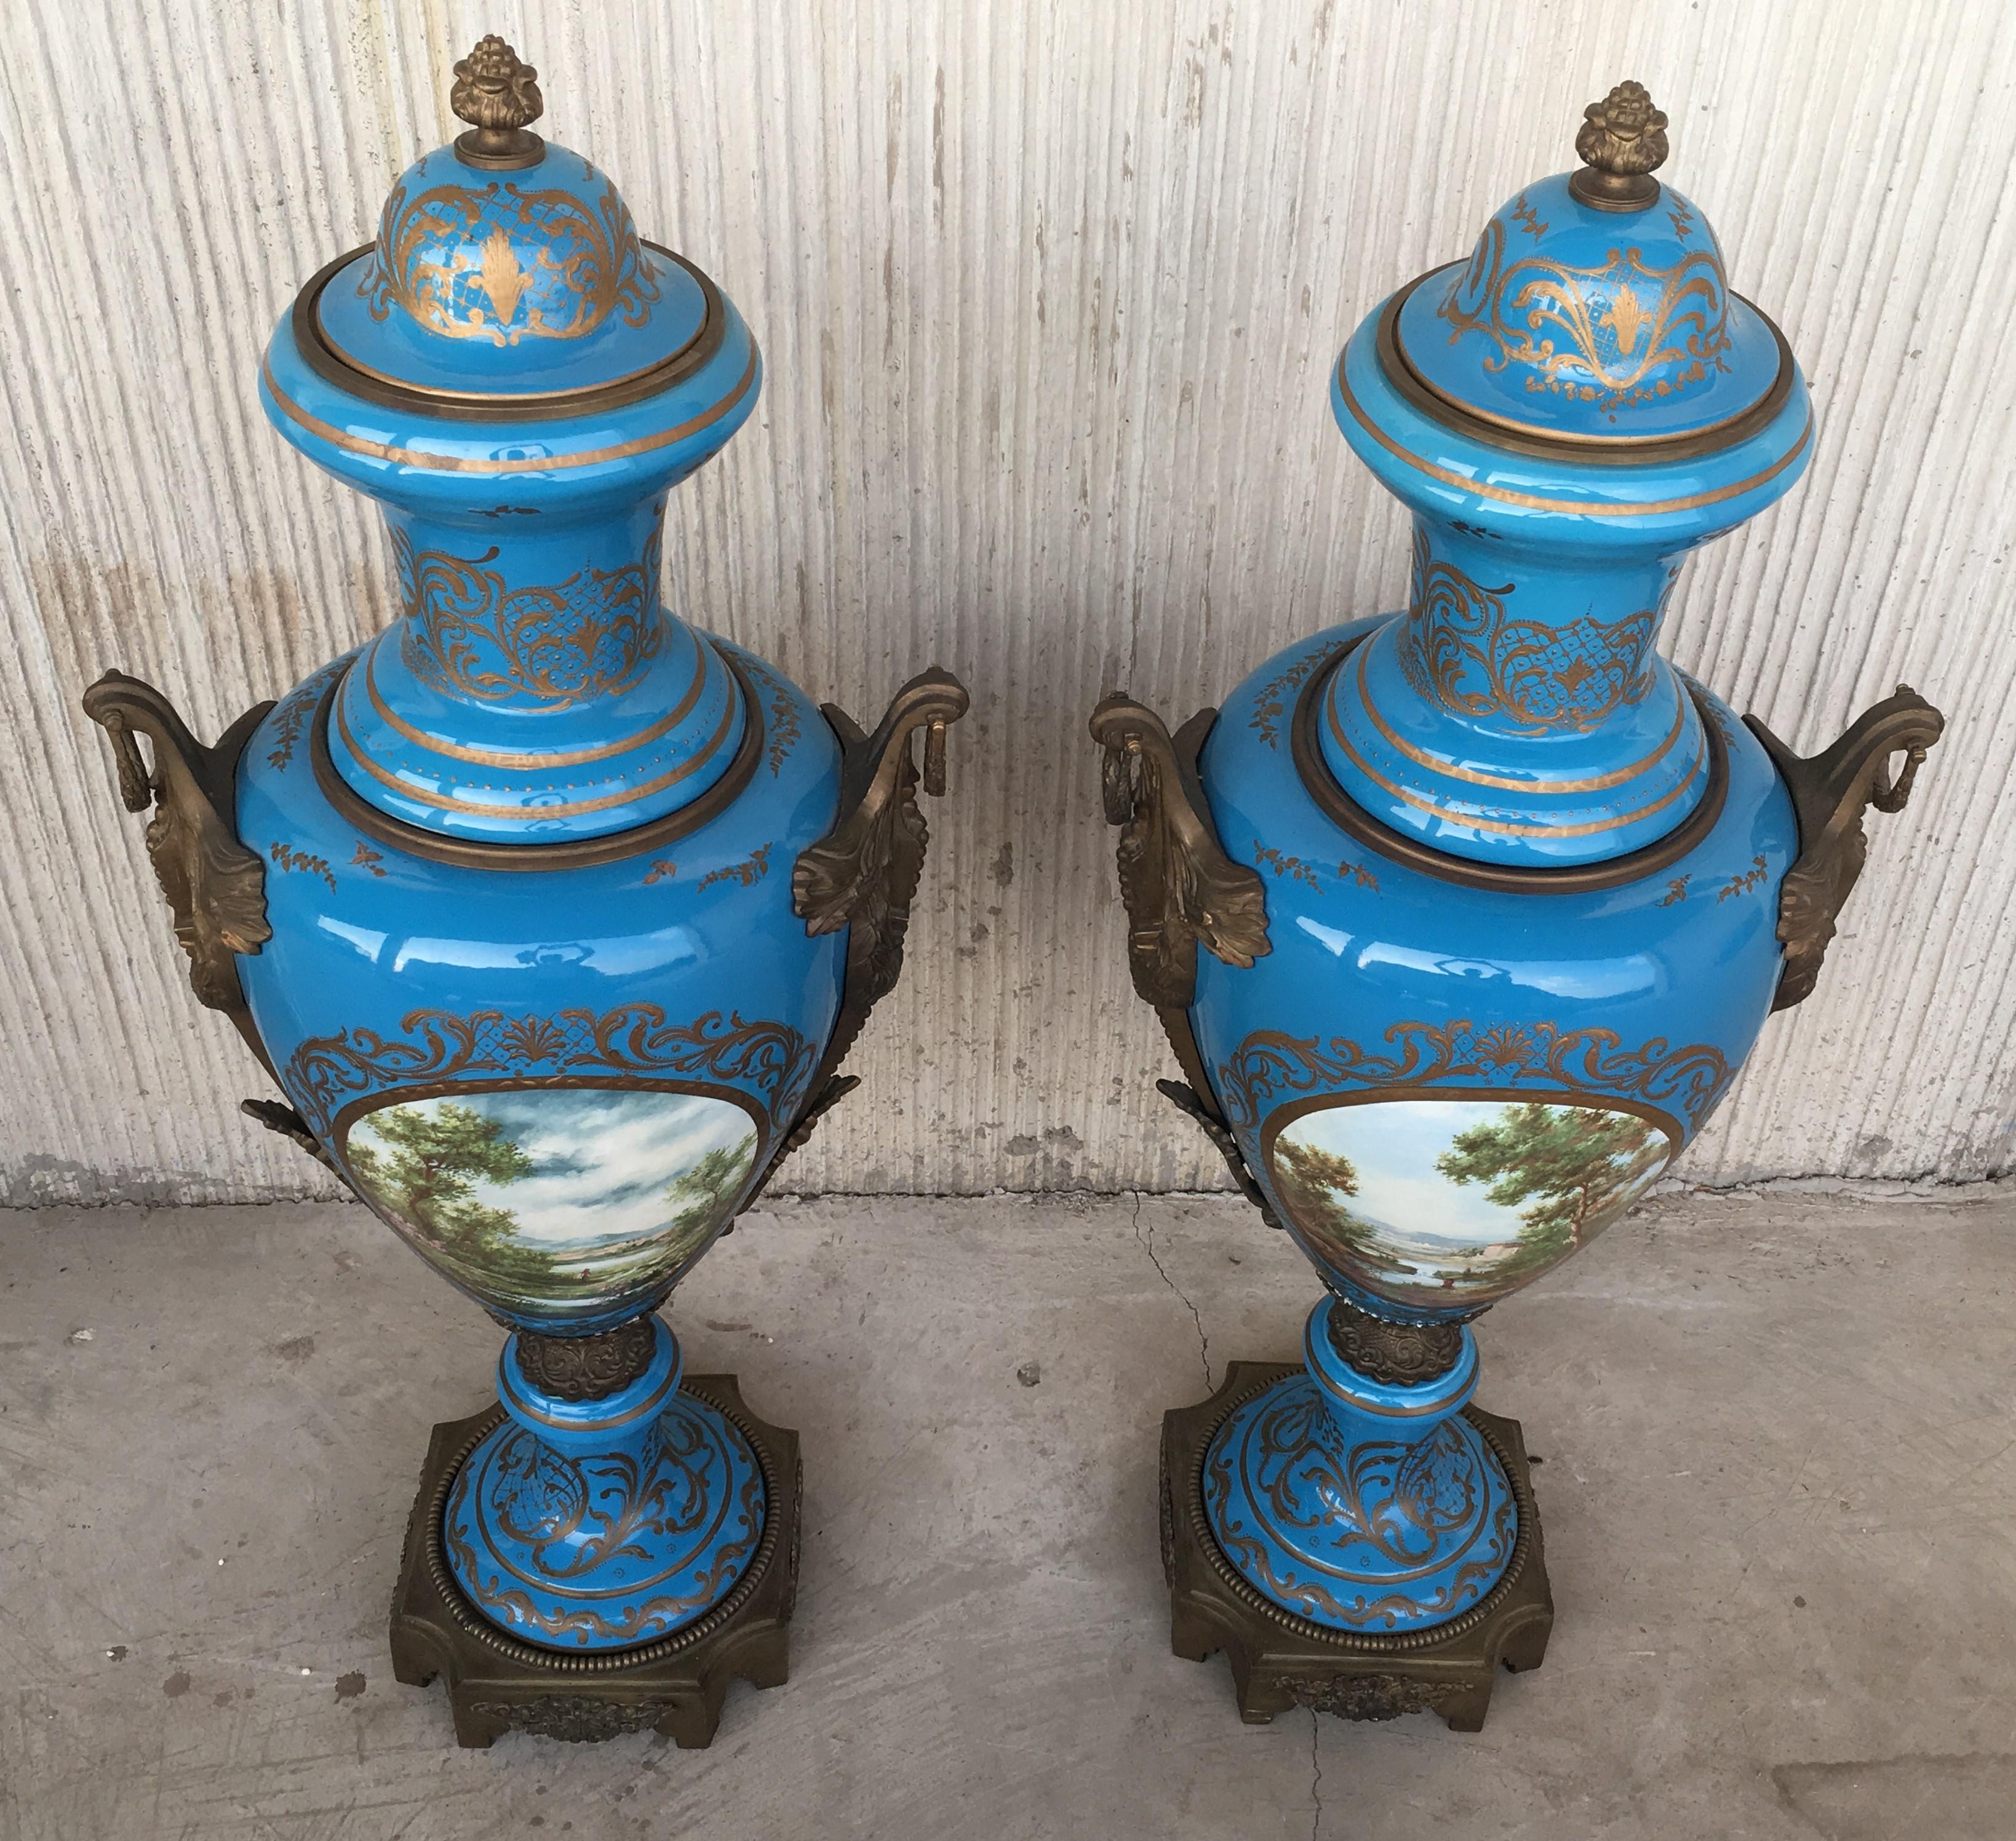 Neoclassical Pair of Large Antiques French Ormolu-Mounted & Painted Pair of Sèvres Porcelain For Sale